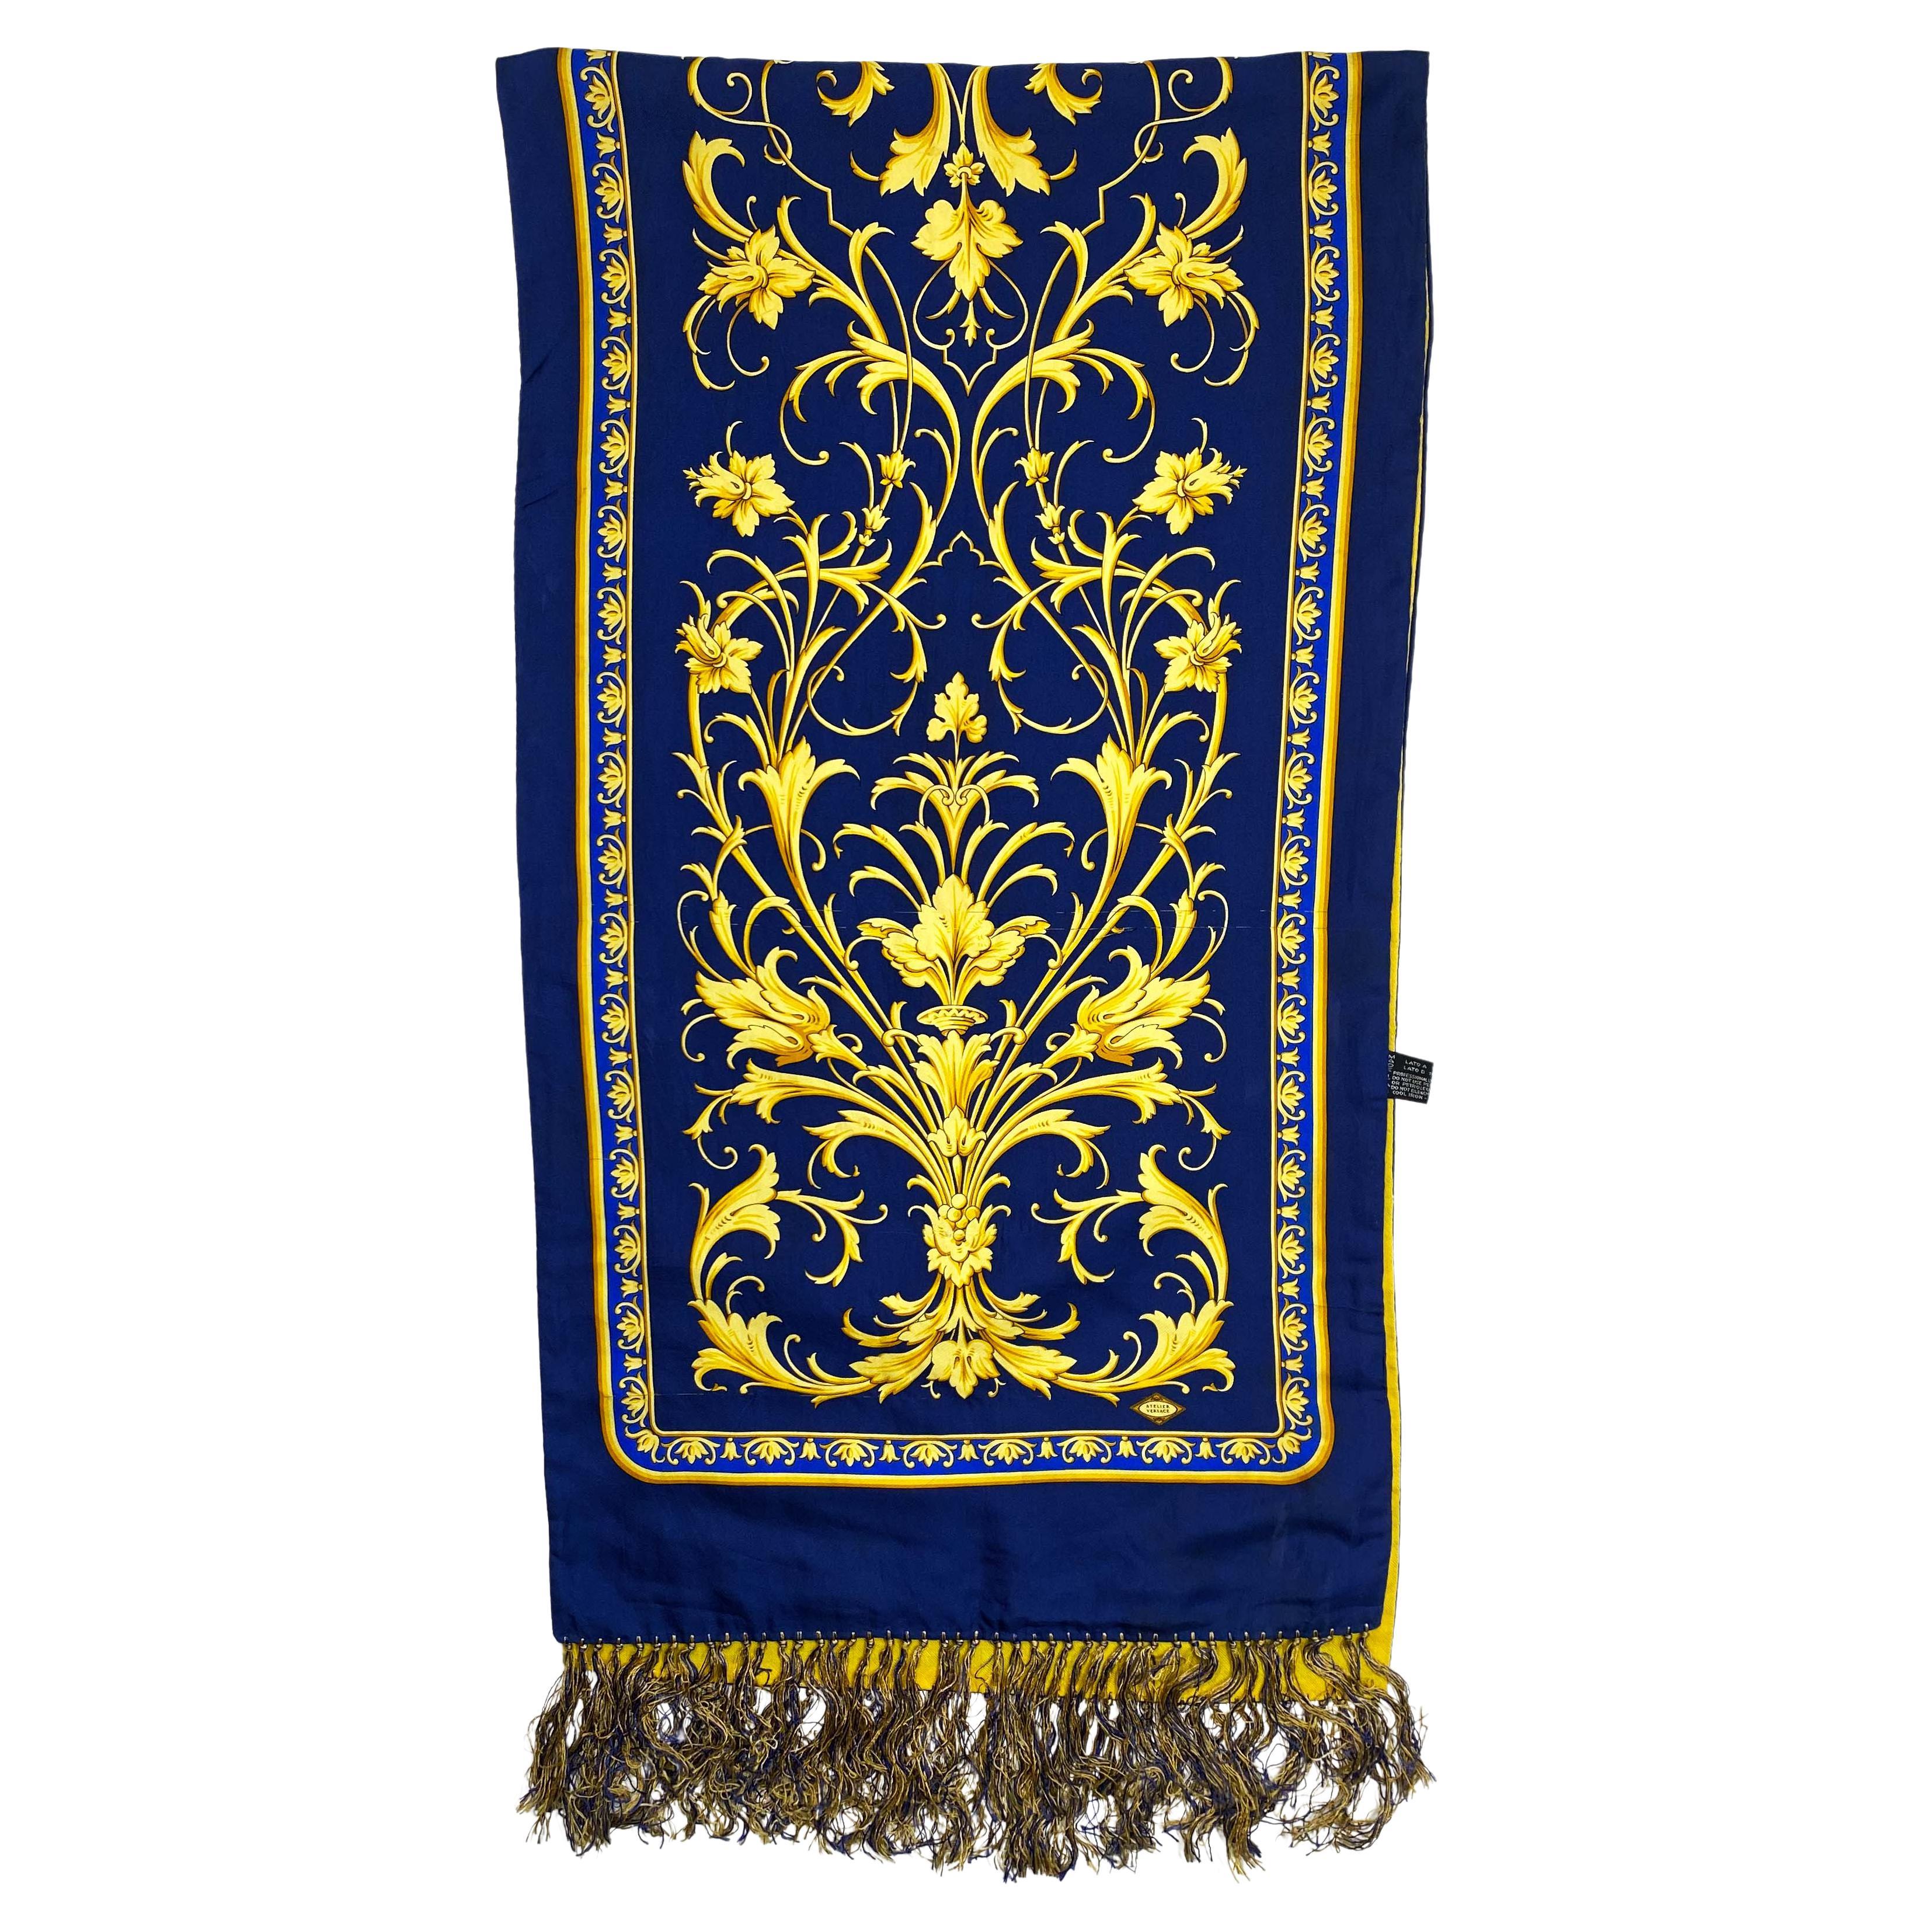 TheRealList presents: a stunning silk Atelier Versace scarf, designed by Gianni Versace. This beautiful scarf has a deep blue base with a baroque pattern, the back is a lively yellow. 

Follow us on Instagram! @_the_reallist_ 